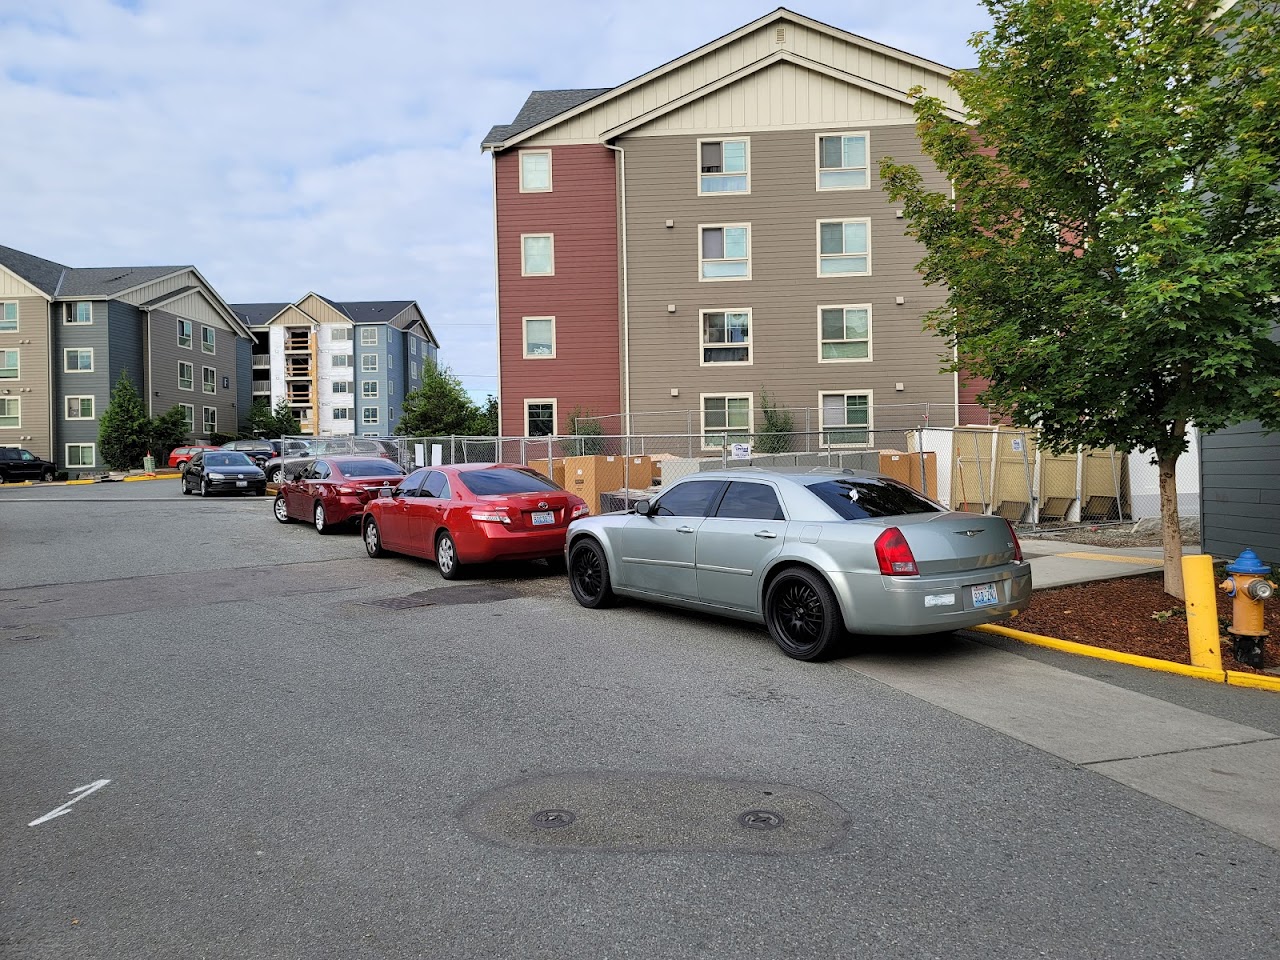 Photo of VANTAGE APARTMENTS. Affordable housing located at 12909 MUKILTEO SPEEDWAY LYNNWOOD, WA 98037